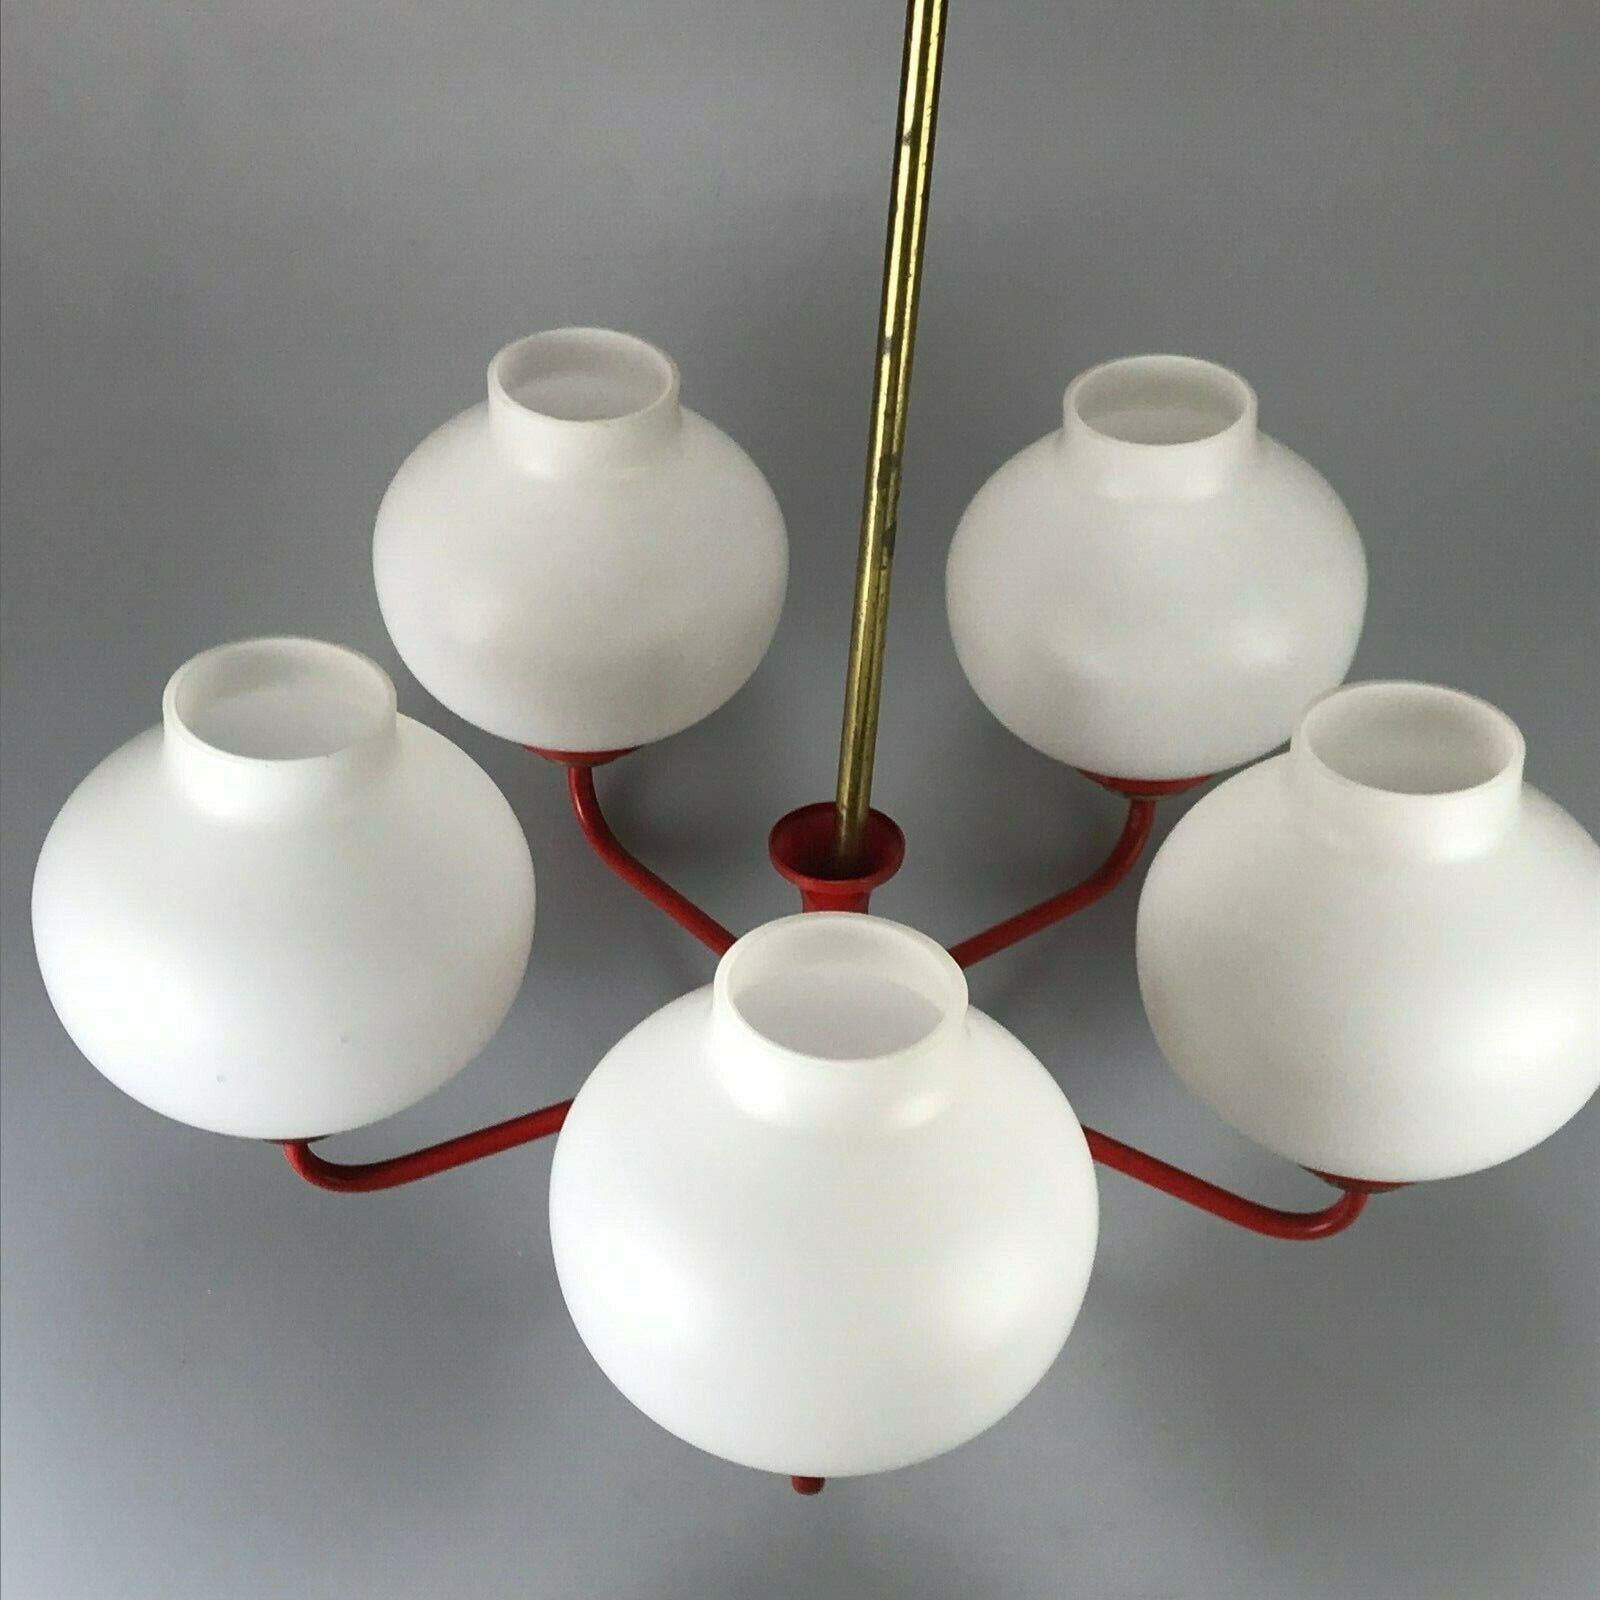 70s Lamp Light Ceiling Lamp Chandelier Ball Lamp Space Age Design For Sale 4